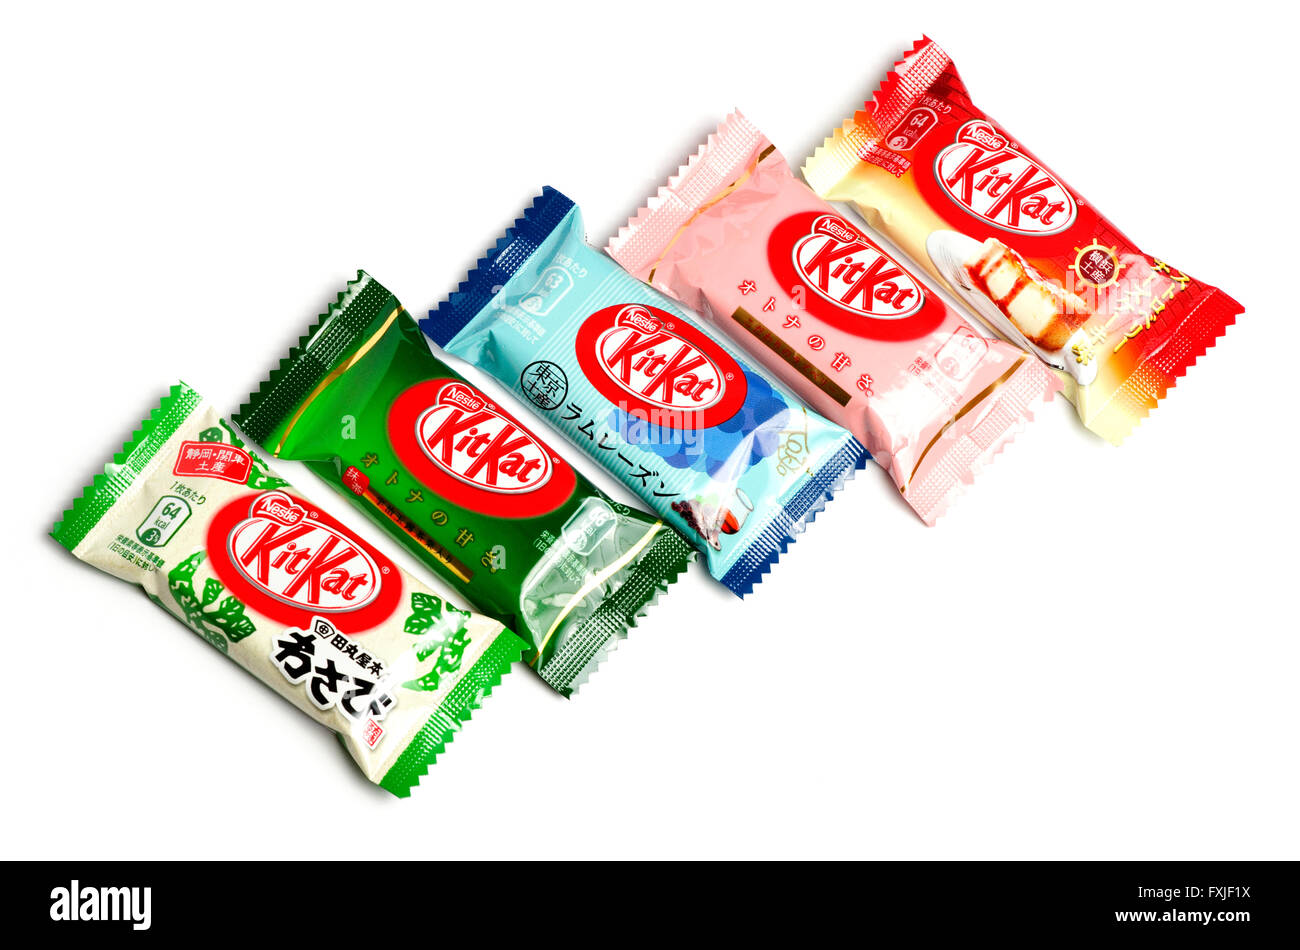 Variety of KitKat flavours from Japan. (wasabi, matcha (green tea), rum and raisin, raspberry and strawberry cheesecake) Stock Photo